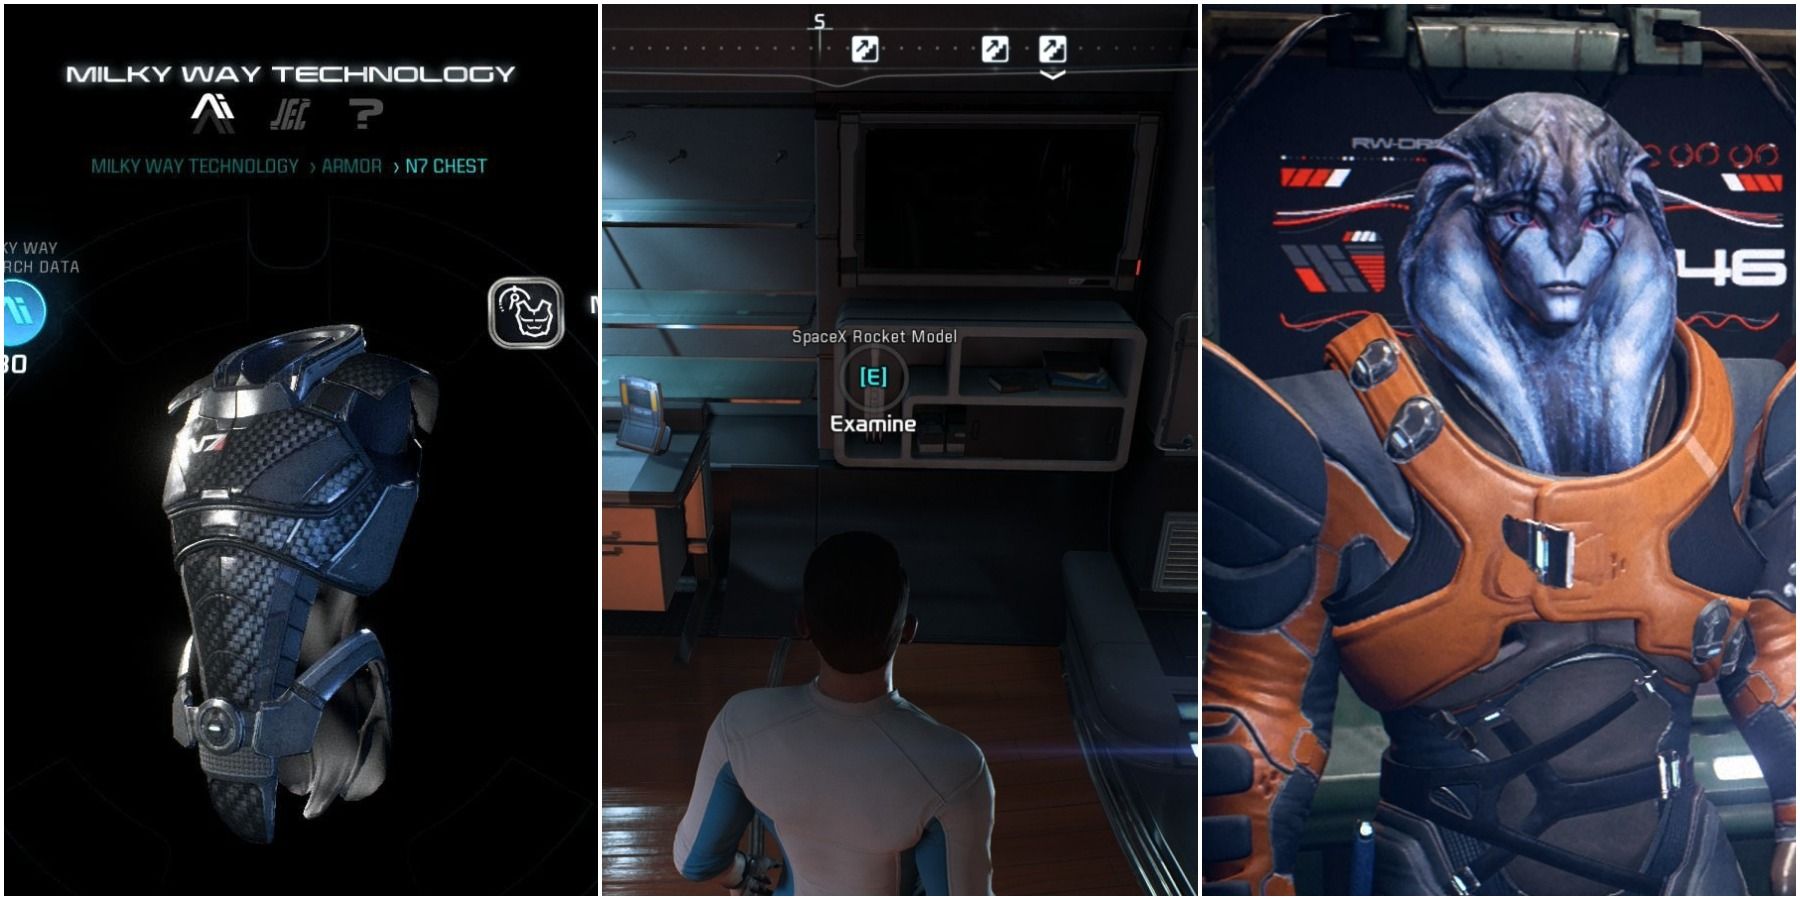 N7 armor, spaceX shuttle, and Jaavik in Andromeda